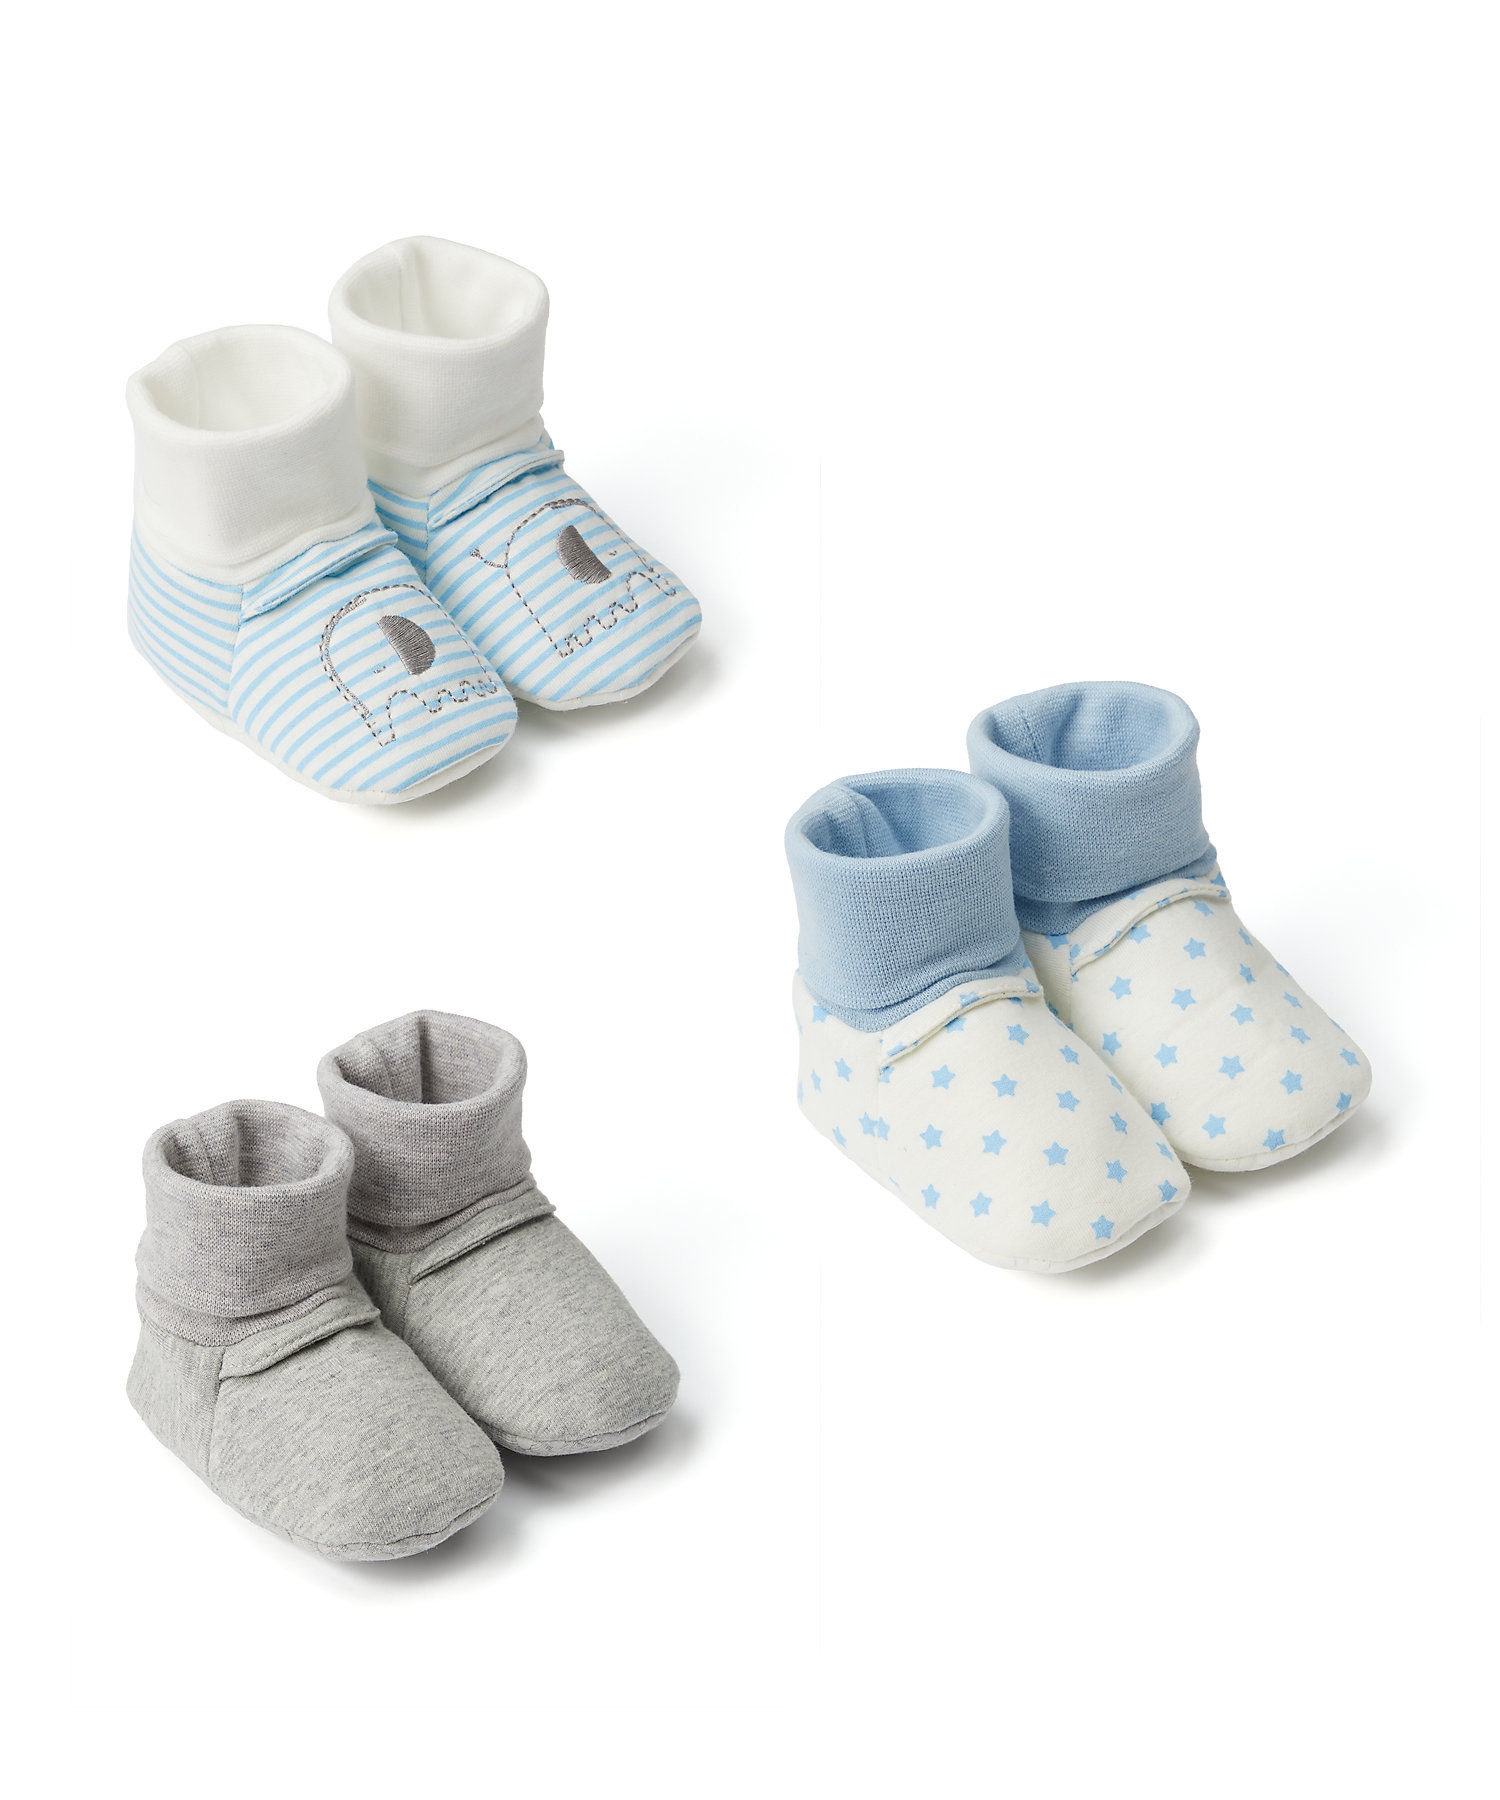 Boys Socktop Booties Elephant Embroidery - Pack Of 3 - Blue Grey